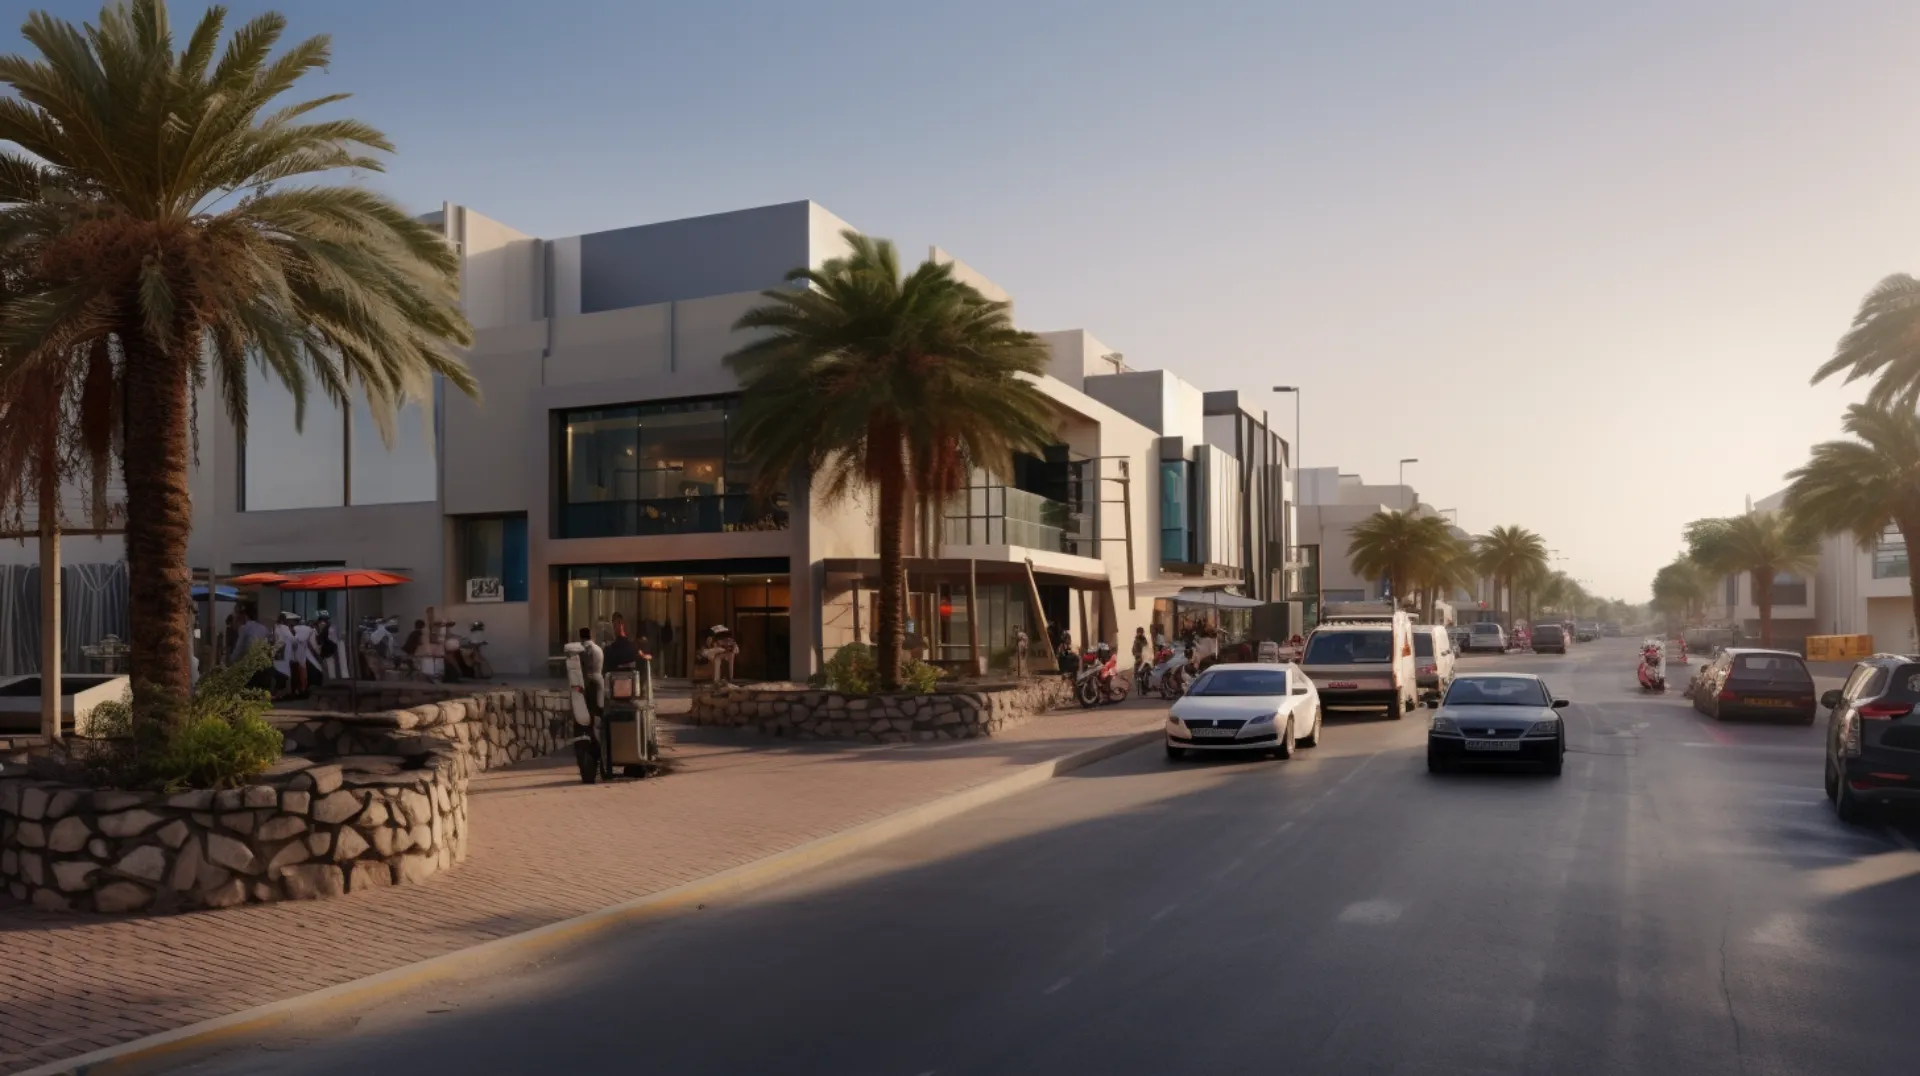 Accessible Living in Al Quoz: A balance of quality and affordability in the vibrant community of Al Quoz